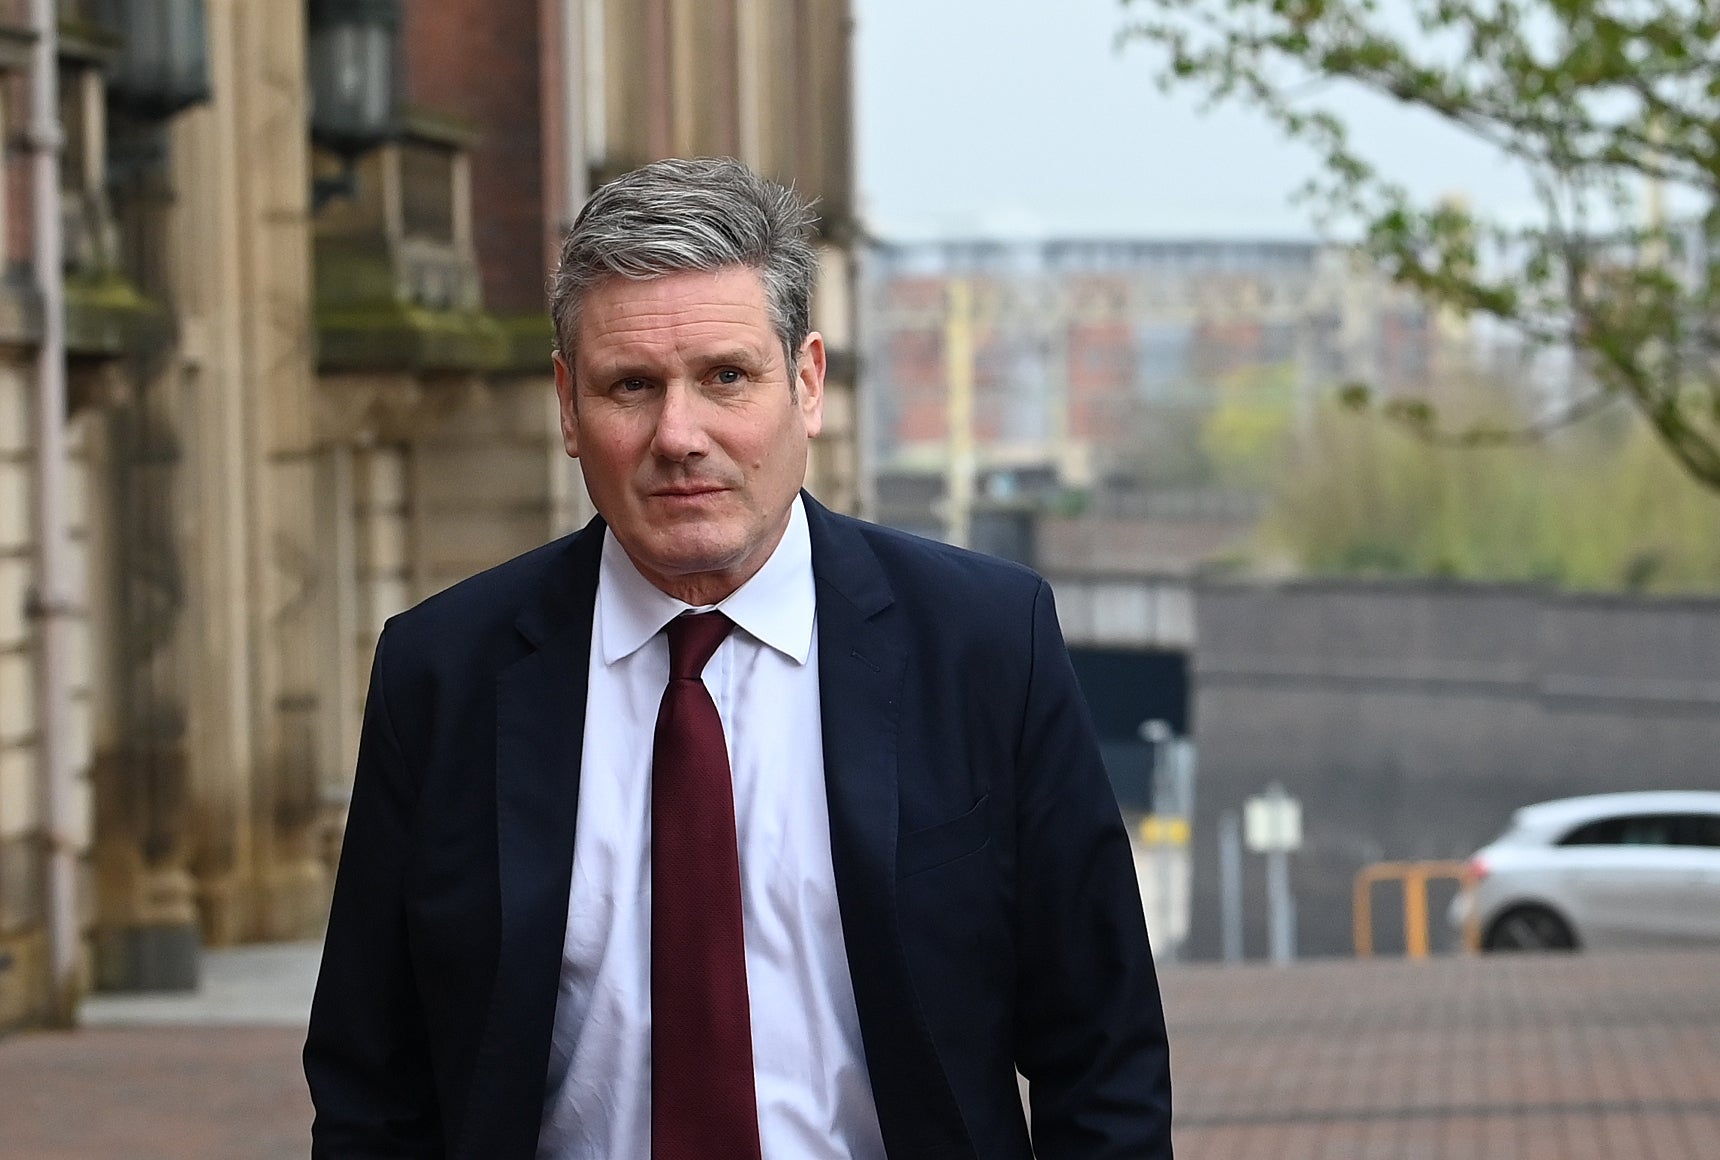 Labour leader Keir Starmer (Dave Nelson/PA)